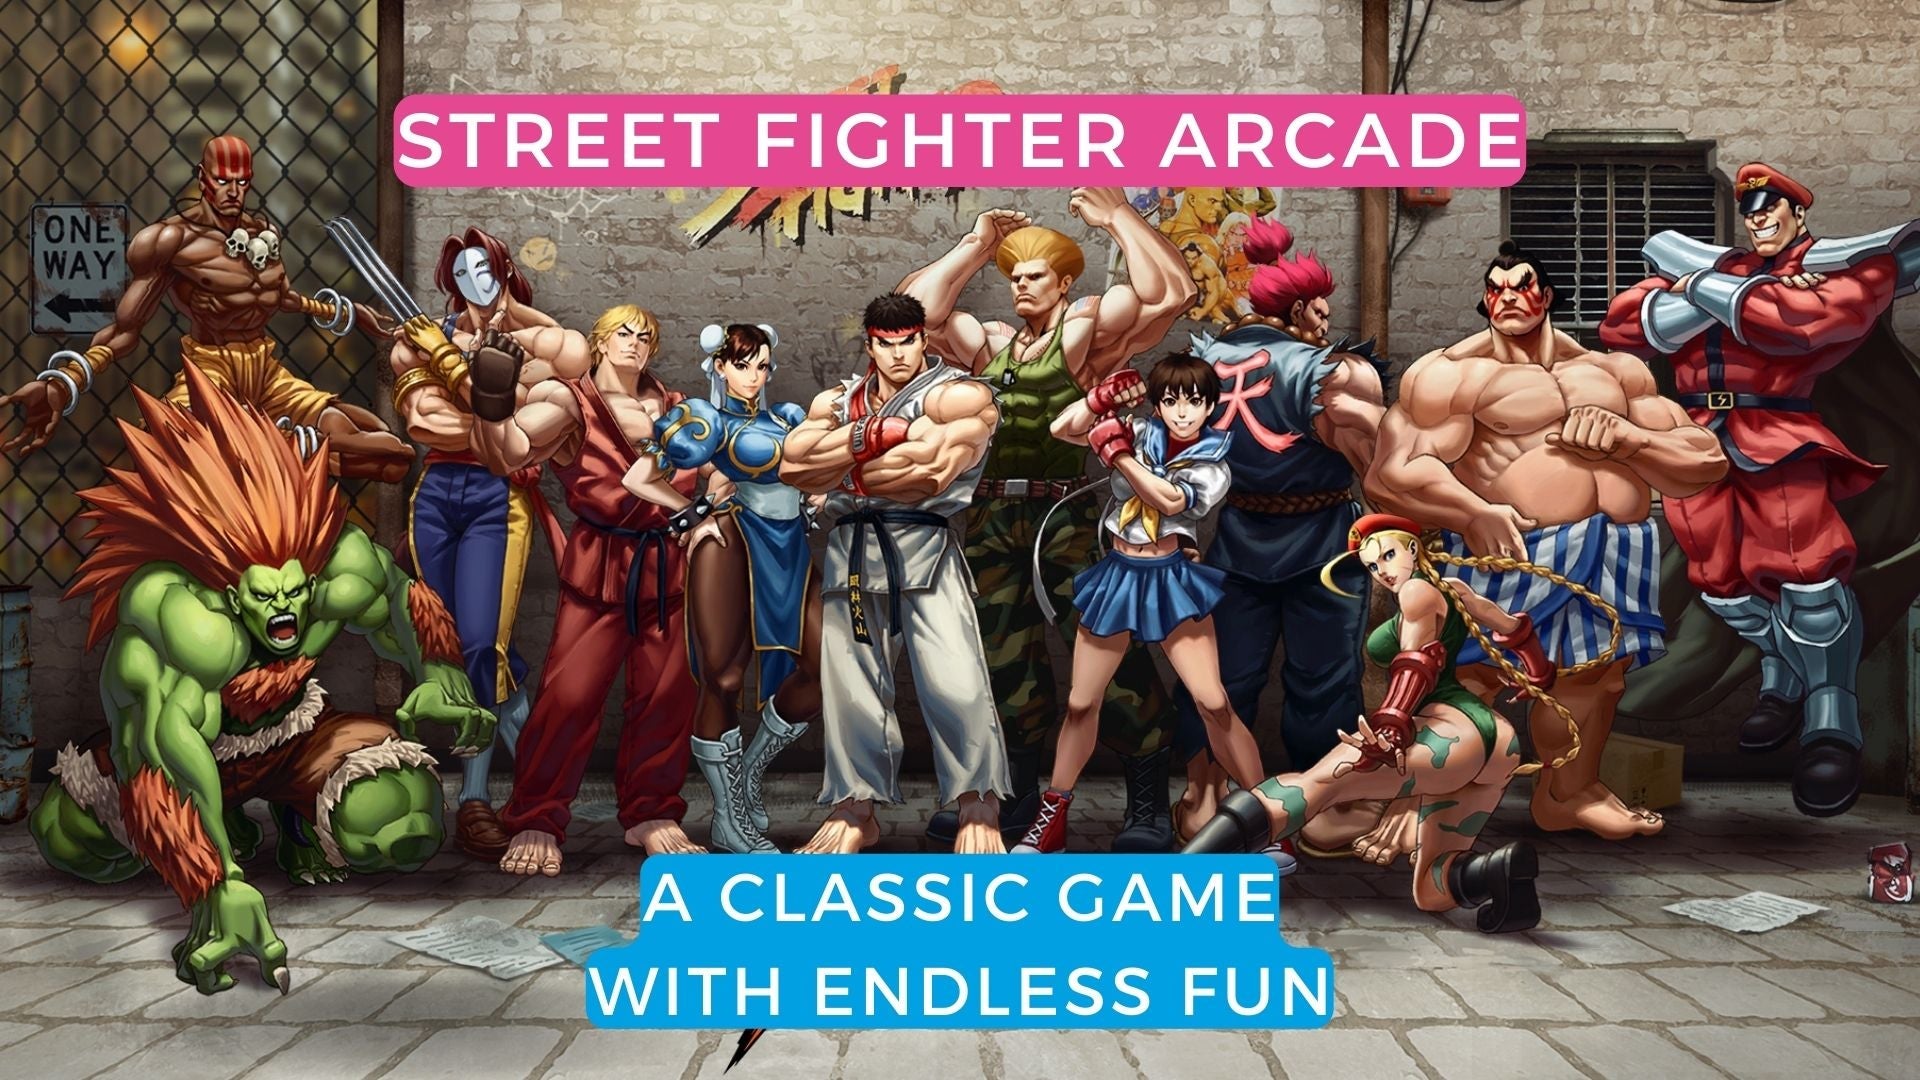 Street Fighter Arcade: A Classic Game with Endless Fun - Gamestate